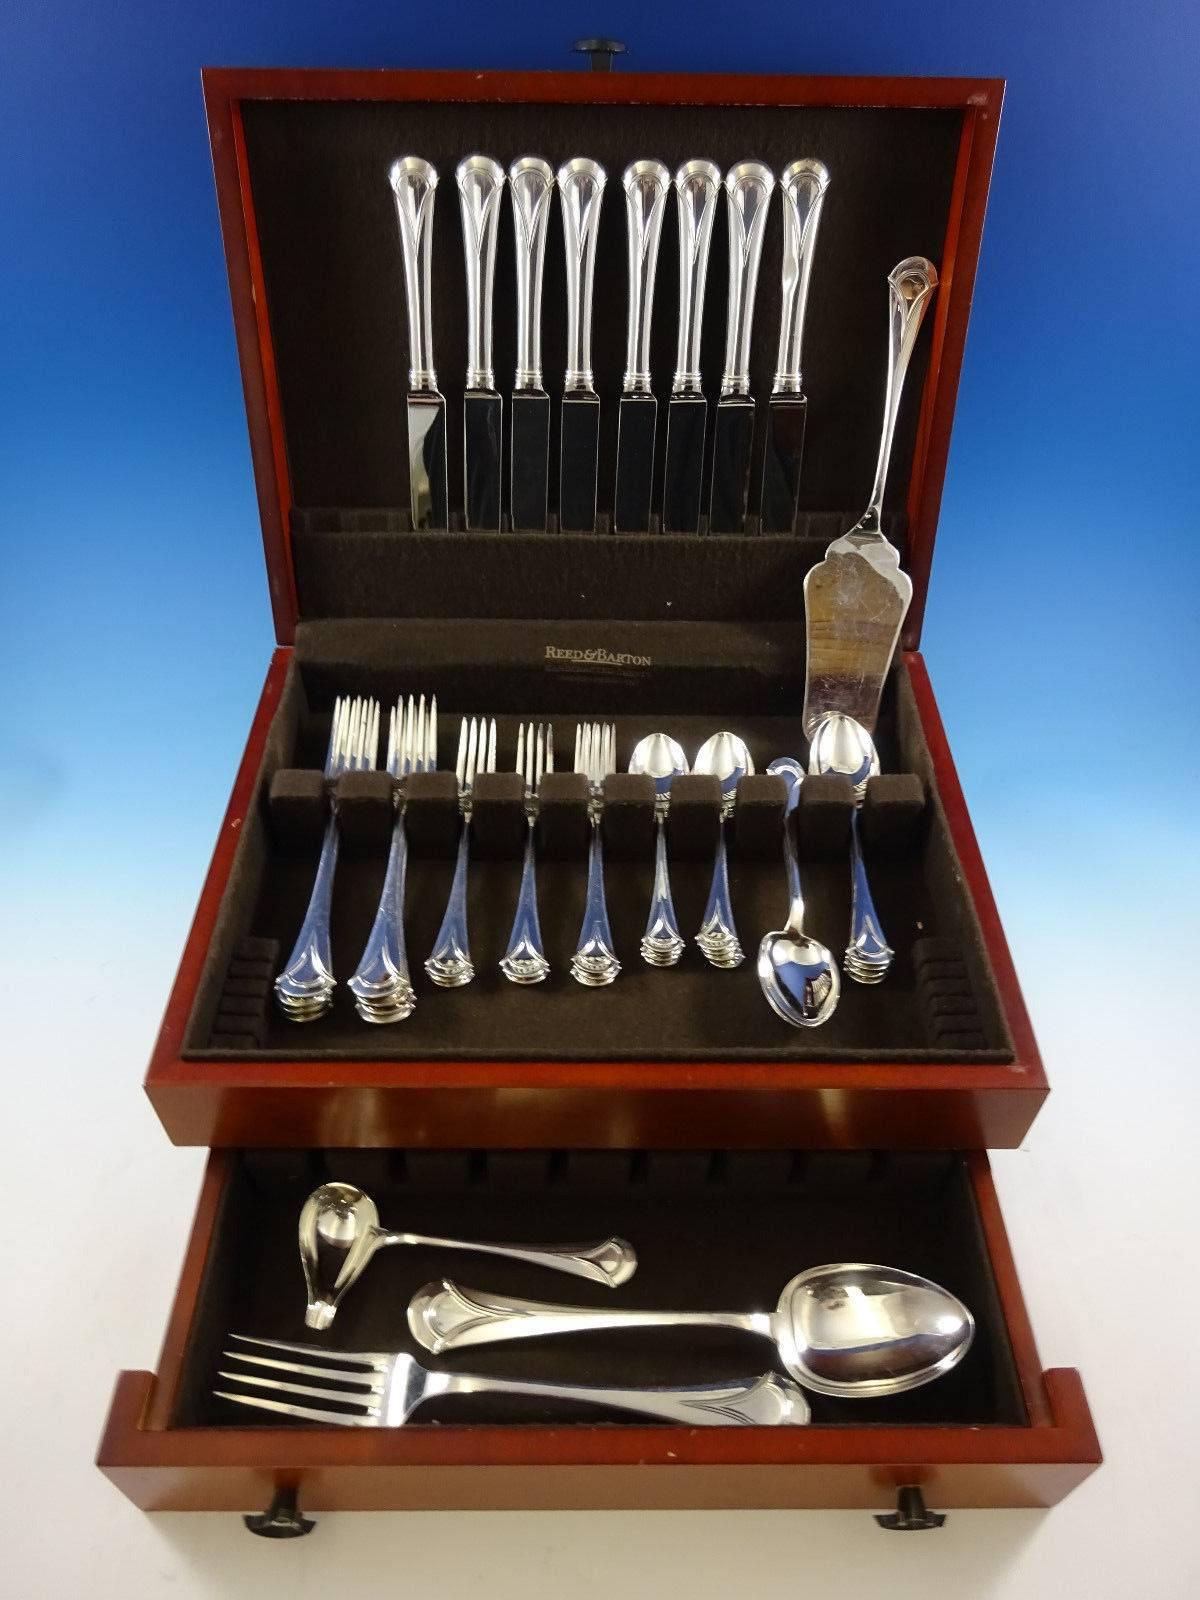 Gorgeous Modern design dinner size Lui by Bellotto, Italy sterling silver flatware set - 44 pieces. This set includes: Eight dinner size knives, 9 1/2